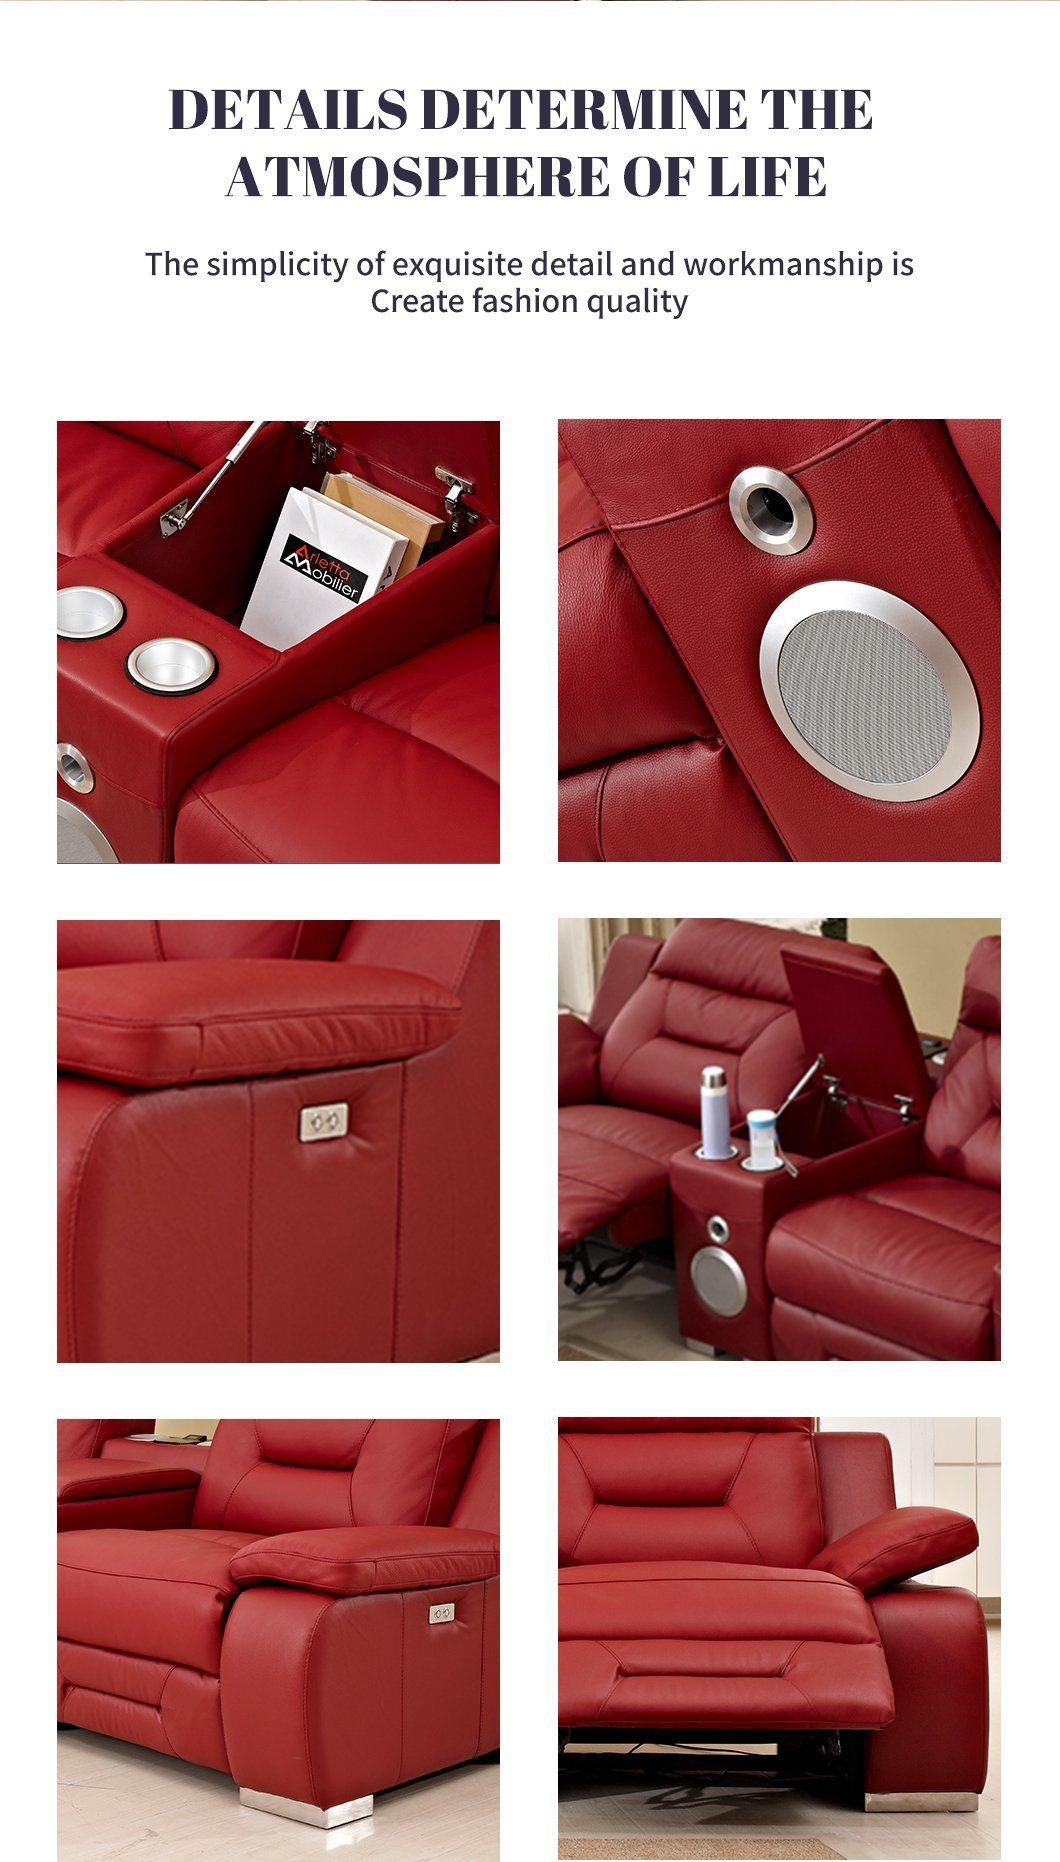 Hot Selling Leather Premium Home Theater Sofa Functional Sofa